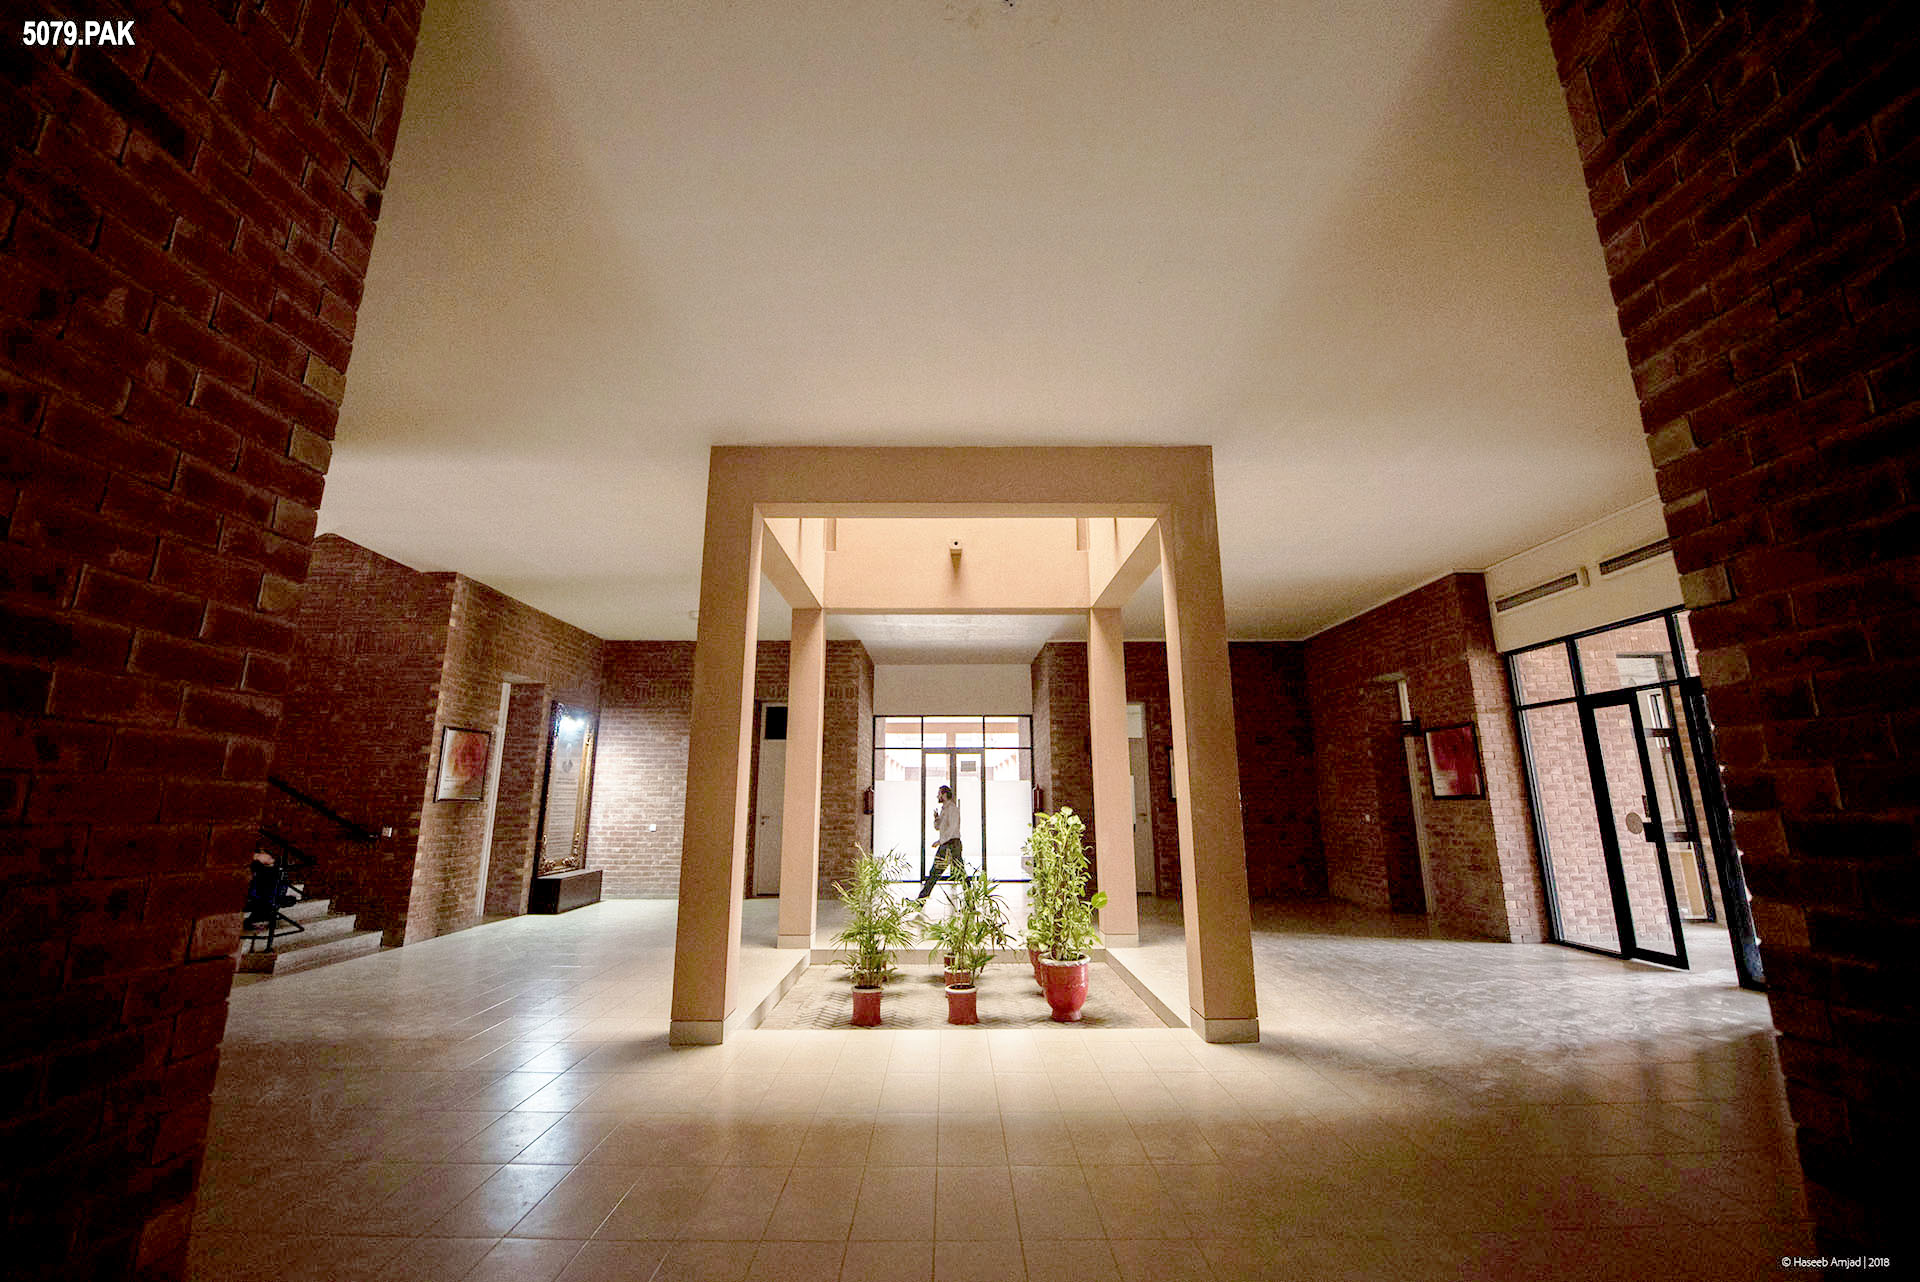 <p>Located in a historic city in an agricultural region of the Punjab, this school for 800 boys and girls was built by a private philanthropist with roots in the city.</p>